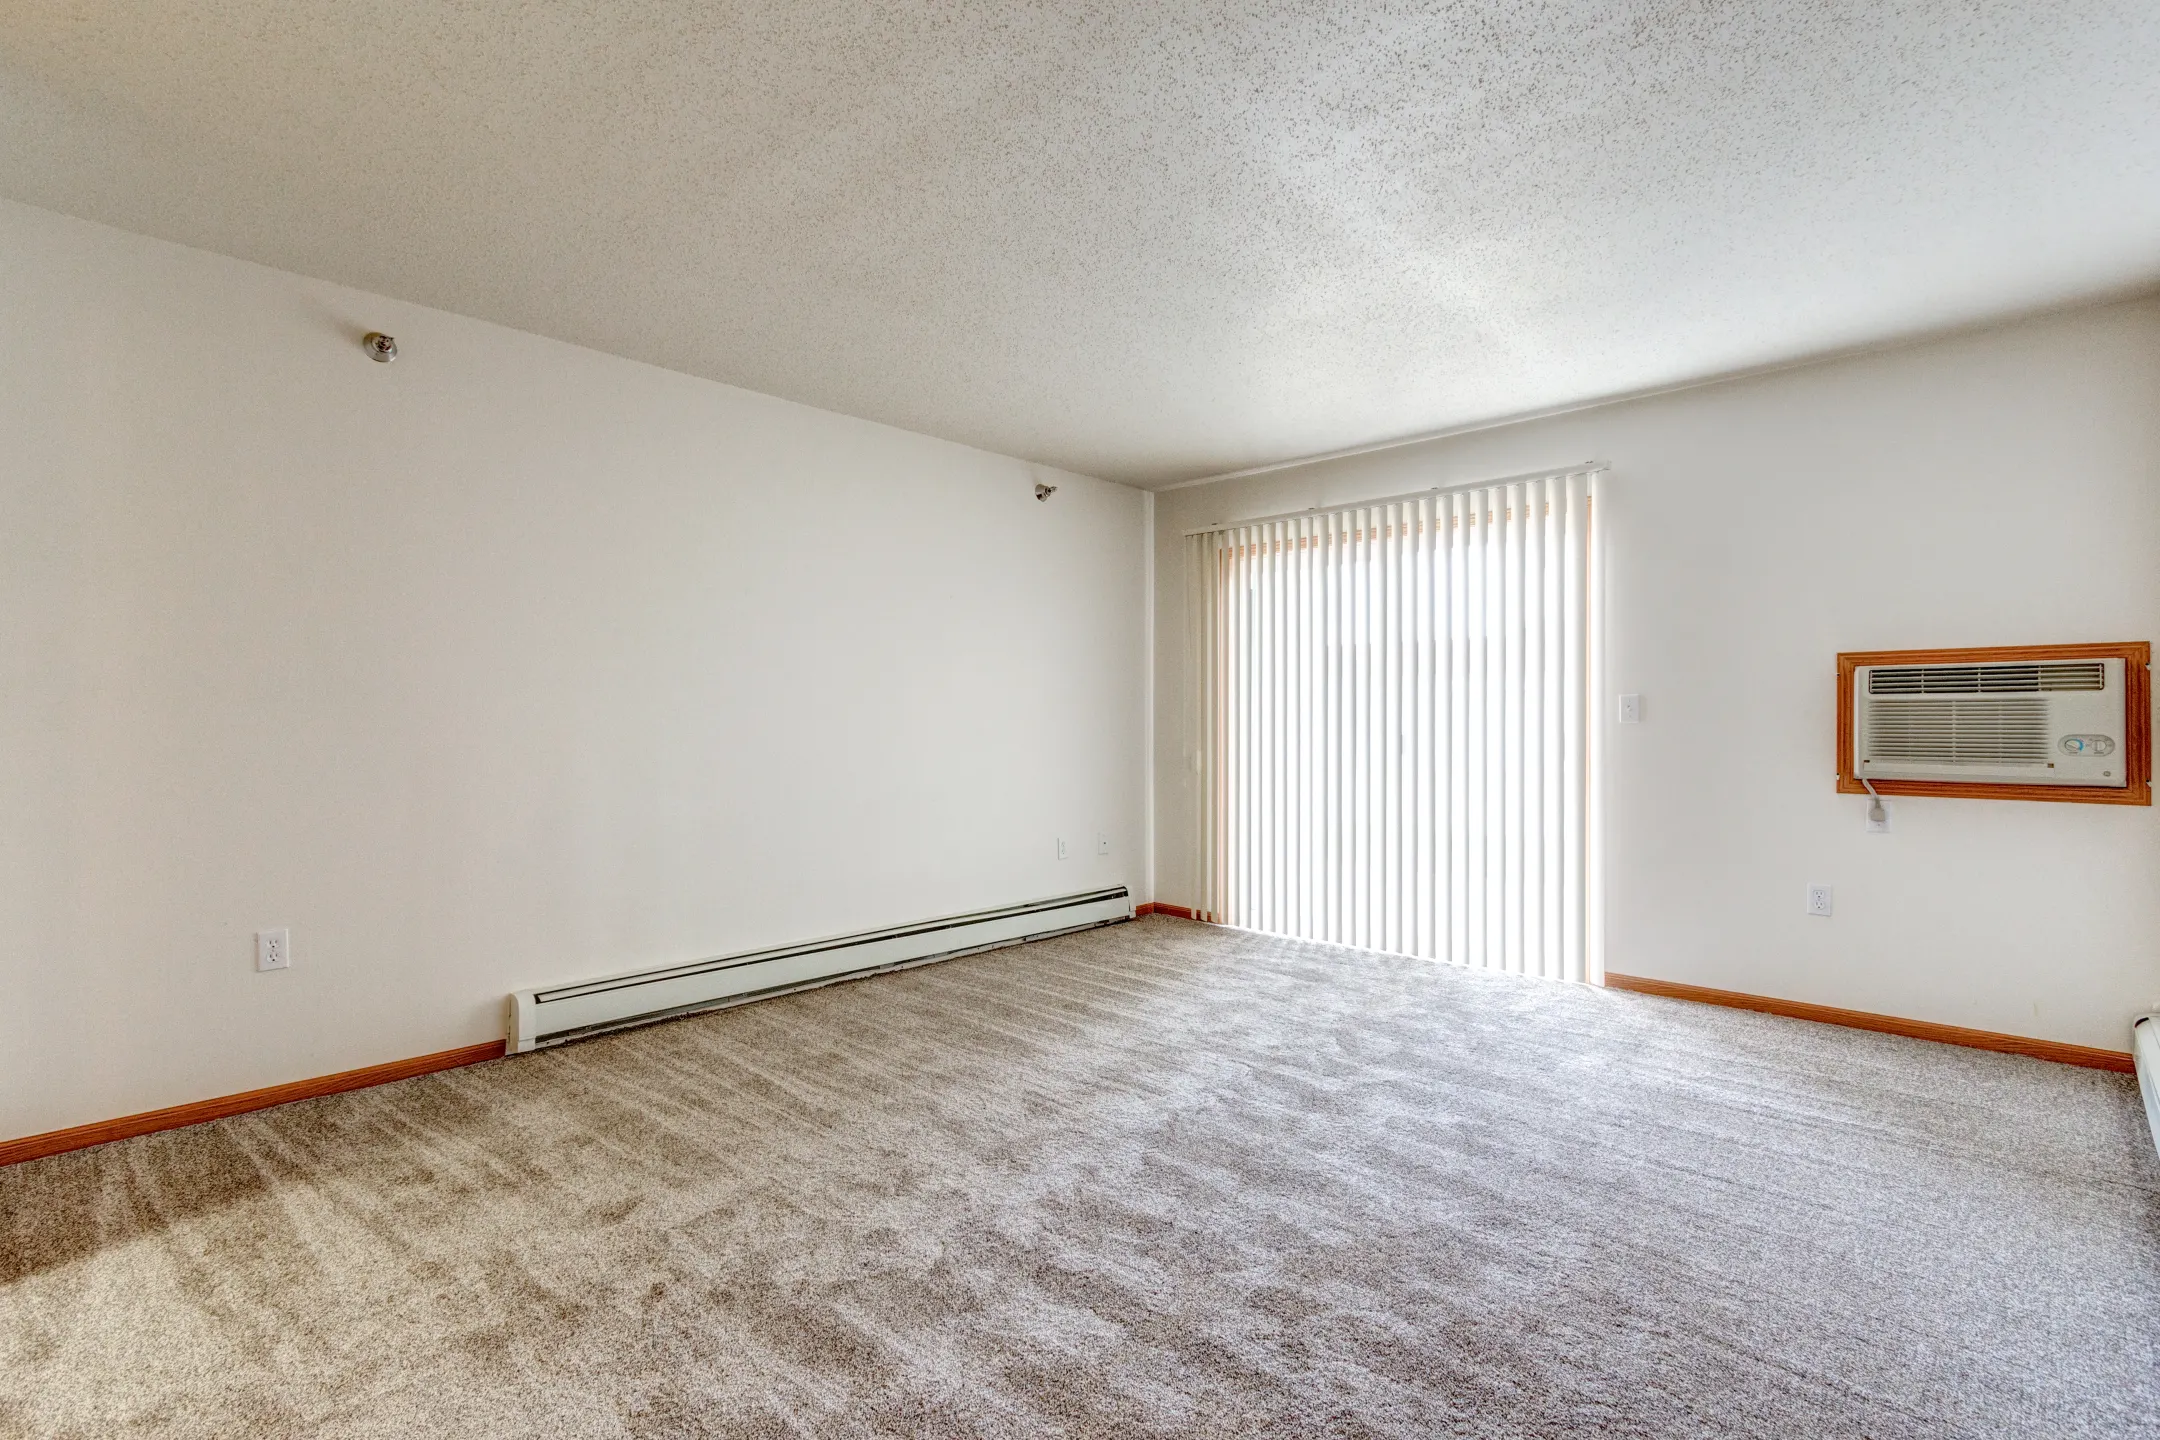 Living Room - Central Park Apartments - Fargo, ND